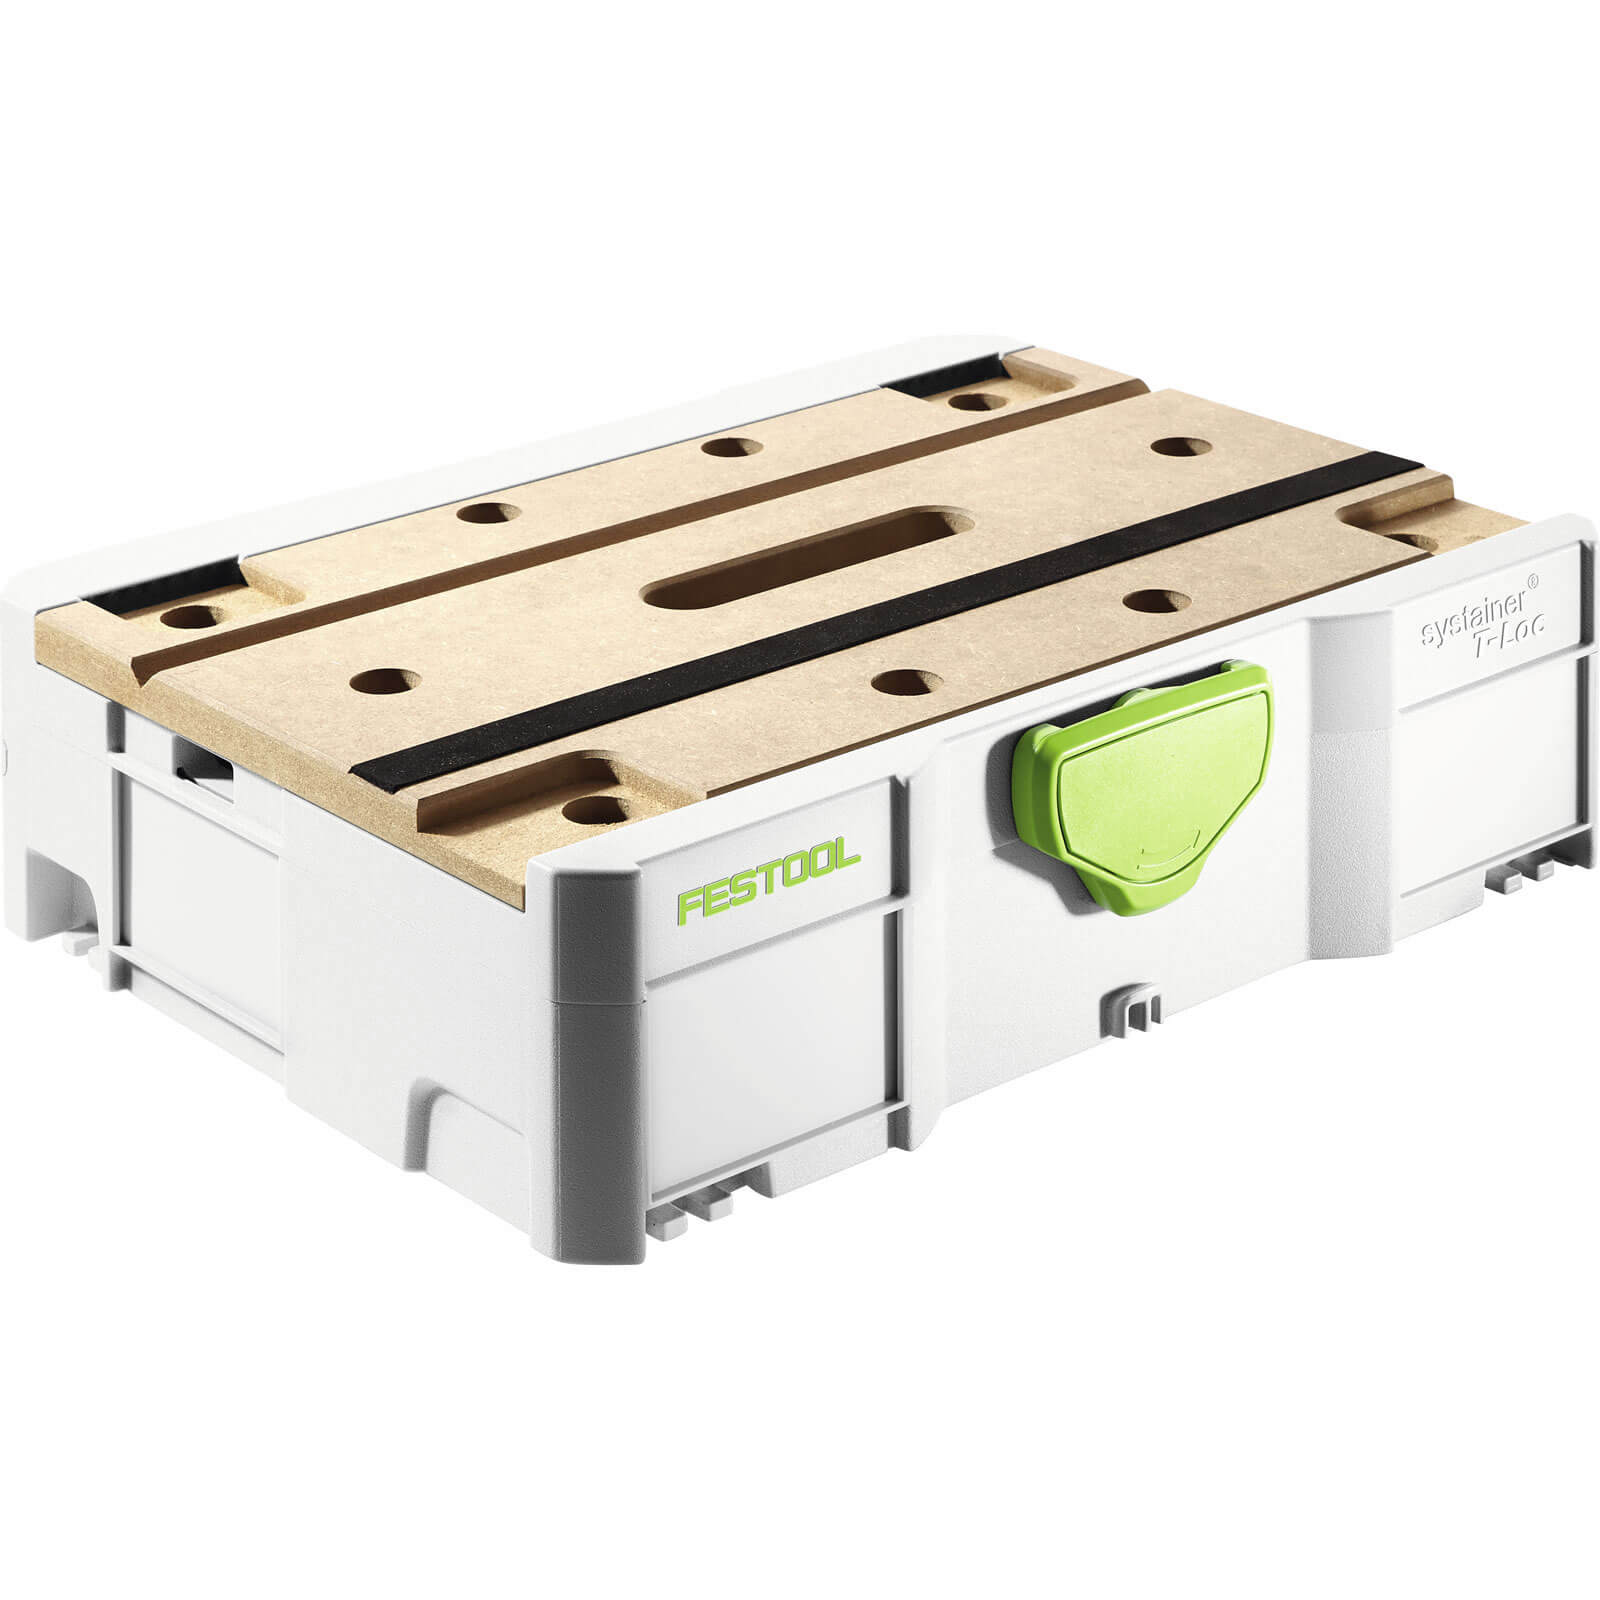 Image of Festool SYS-MFT Systainer Workbench Case